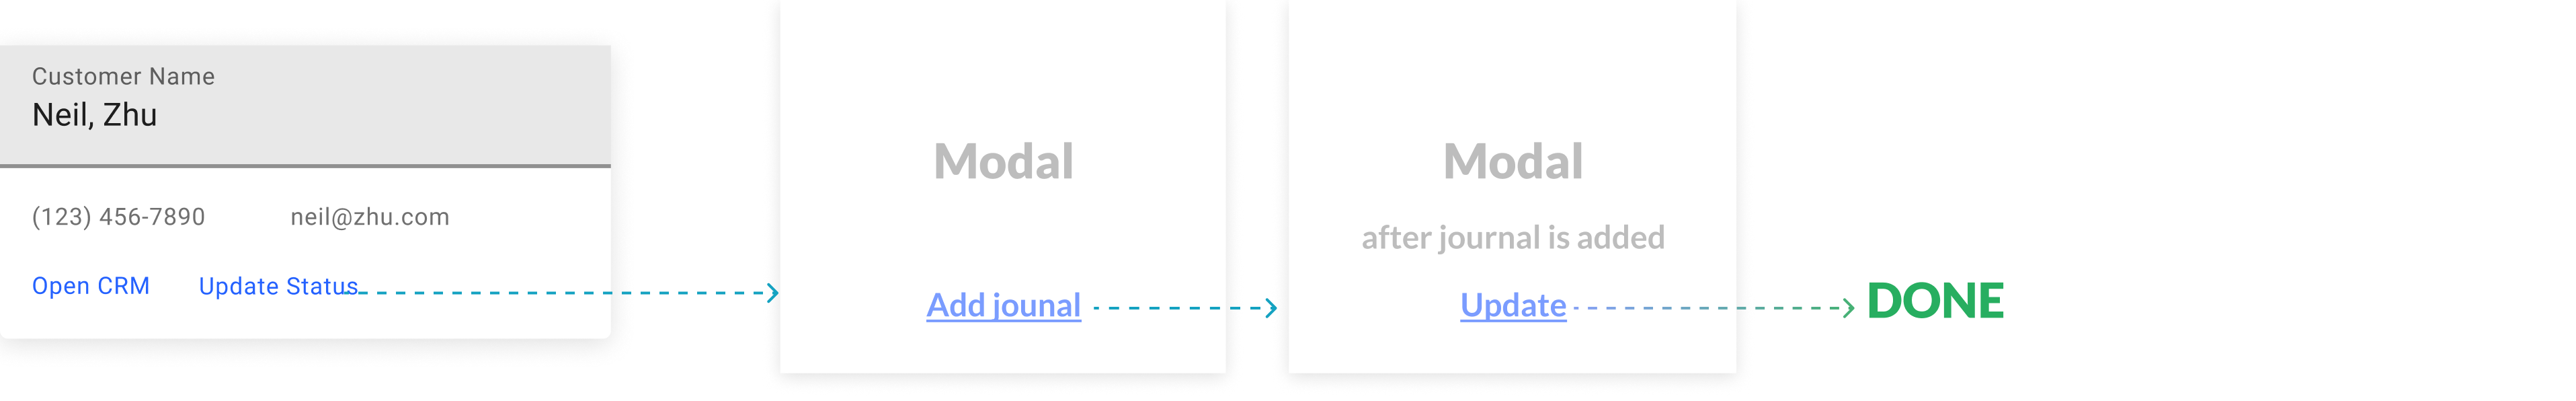 the proposed 4-step flow of journal inout in Sales Order Page